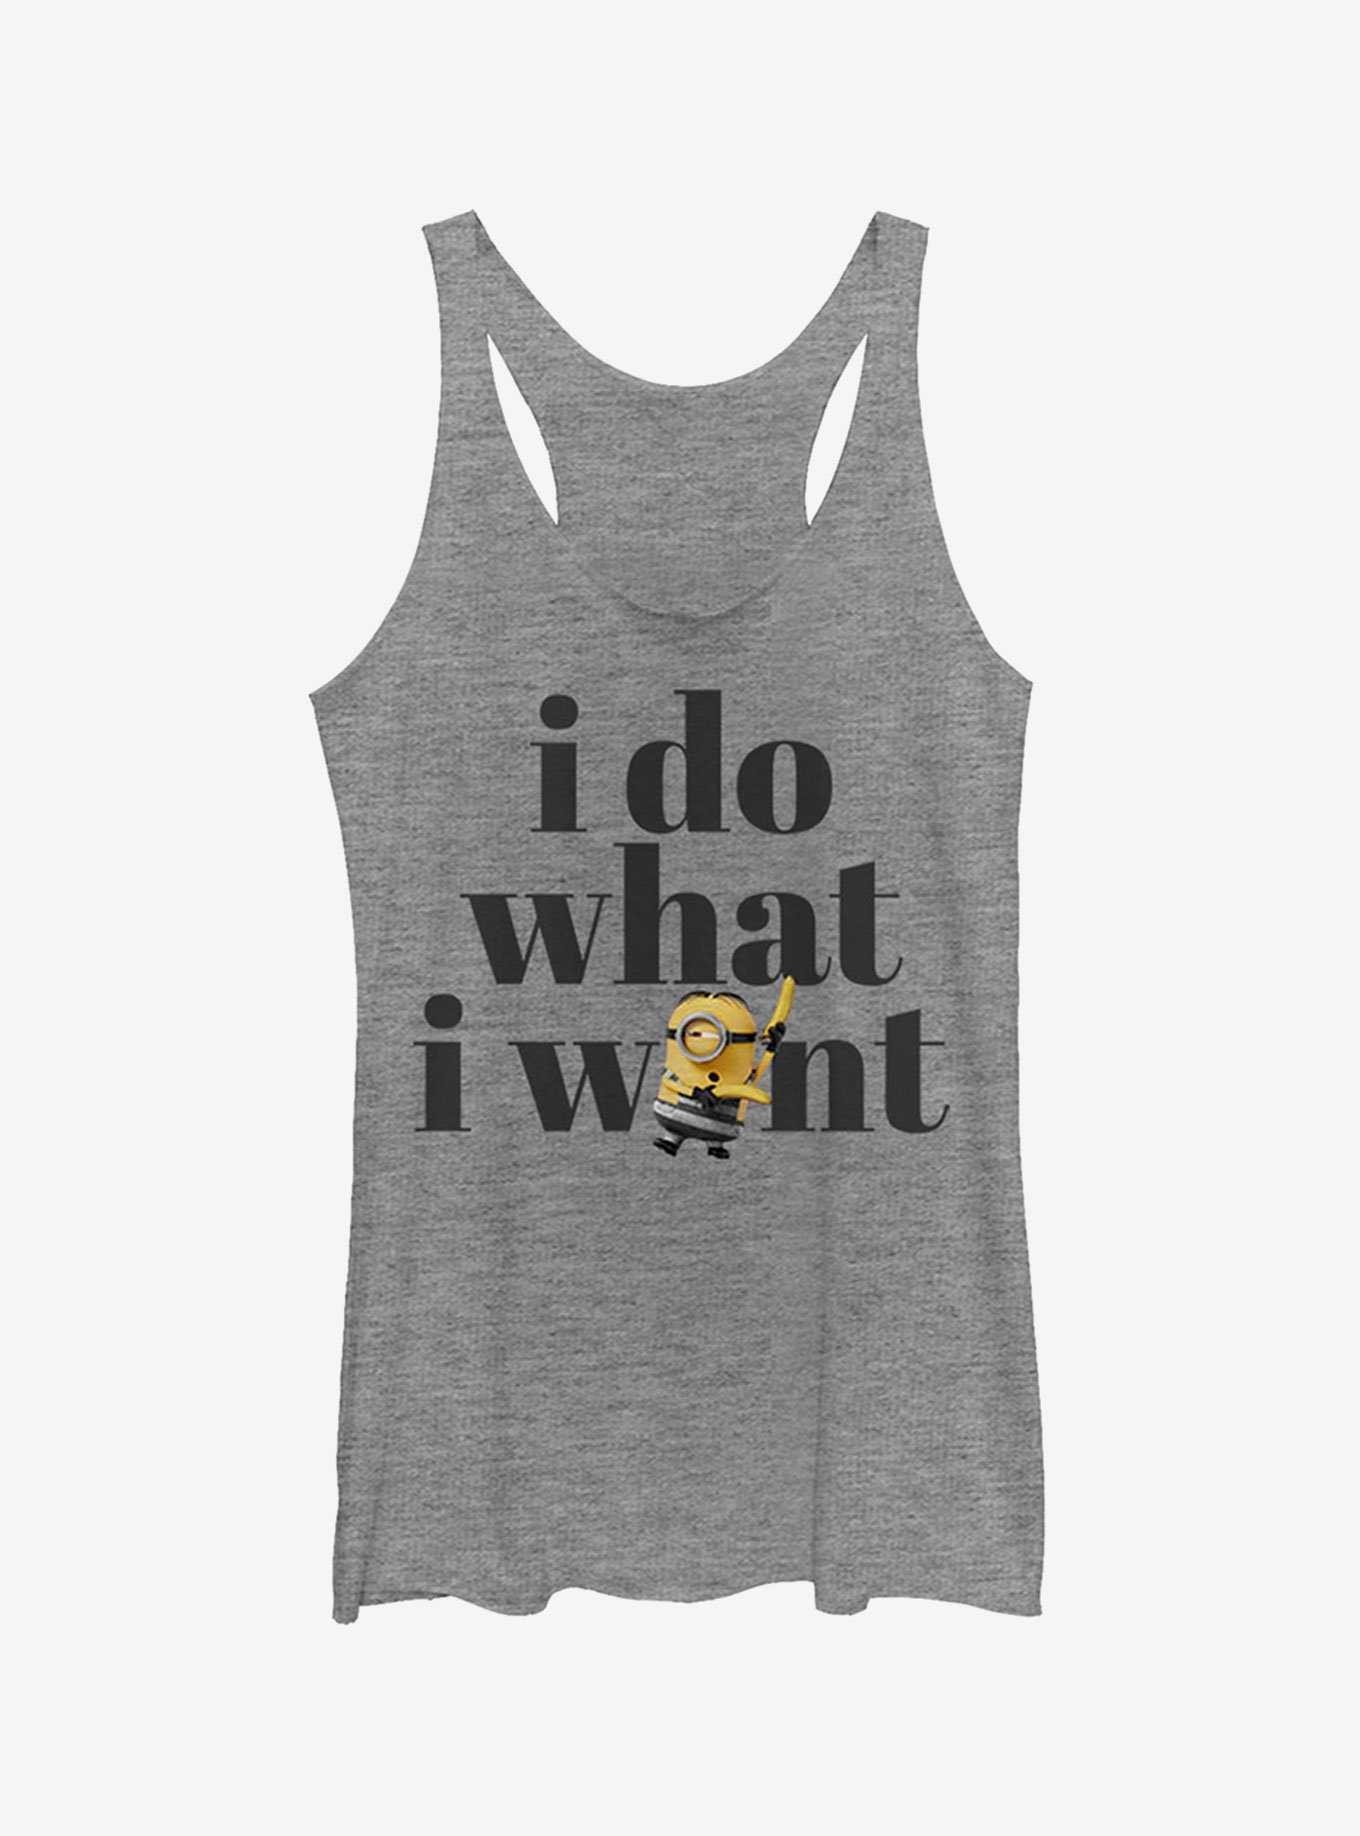 Minion Do What I Want Girls Tank Top, , hi-res